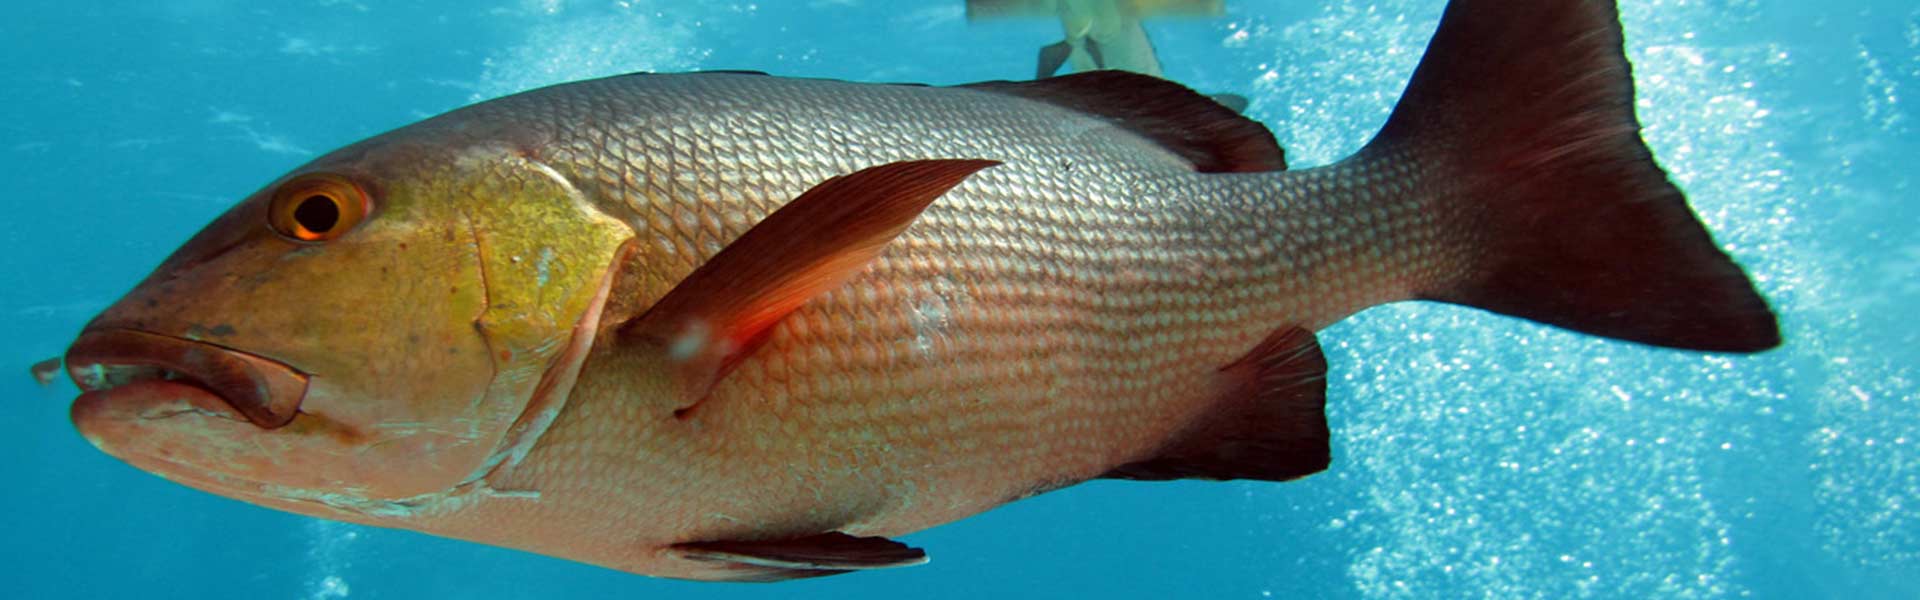 The Snapper Fish And Its Fearsome Teeth